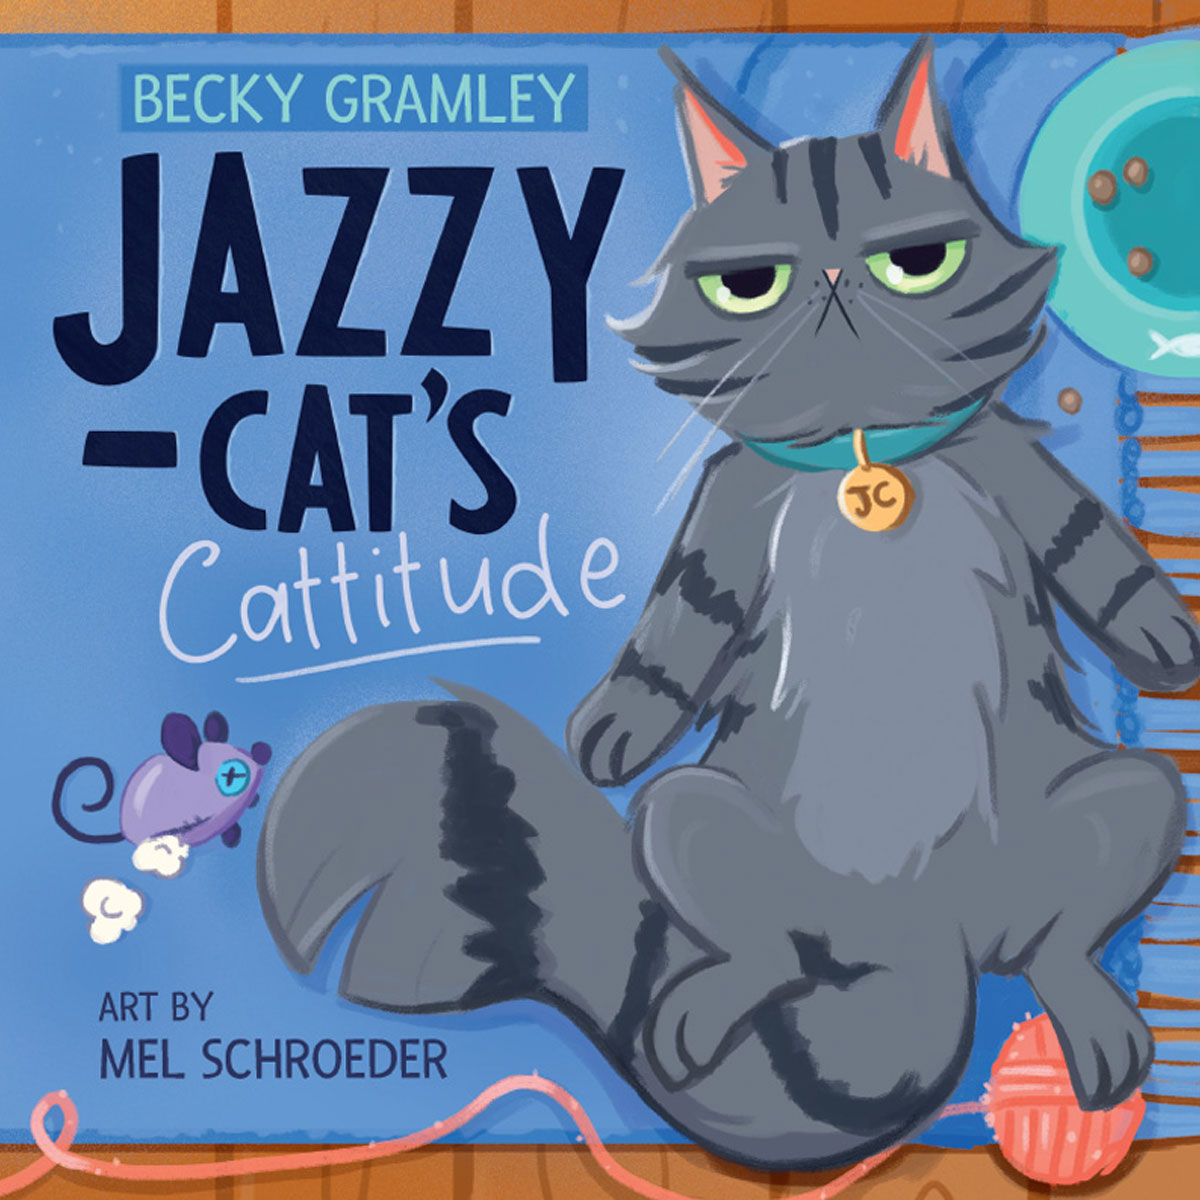 Jazzy-cat's Cattitude by Becky Gramley Book Cover